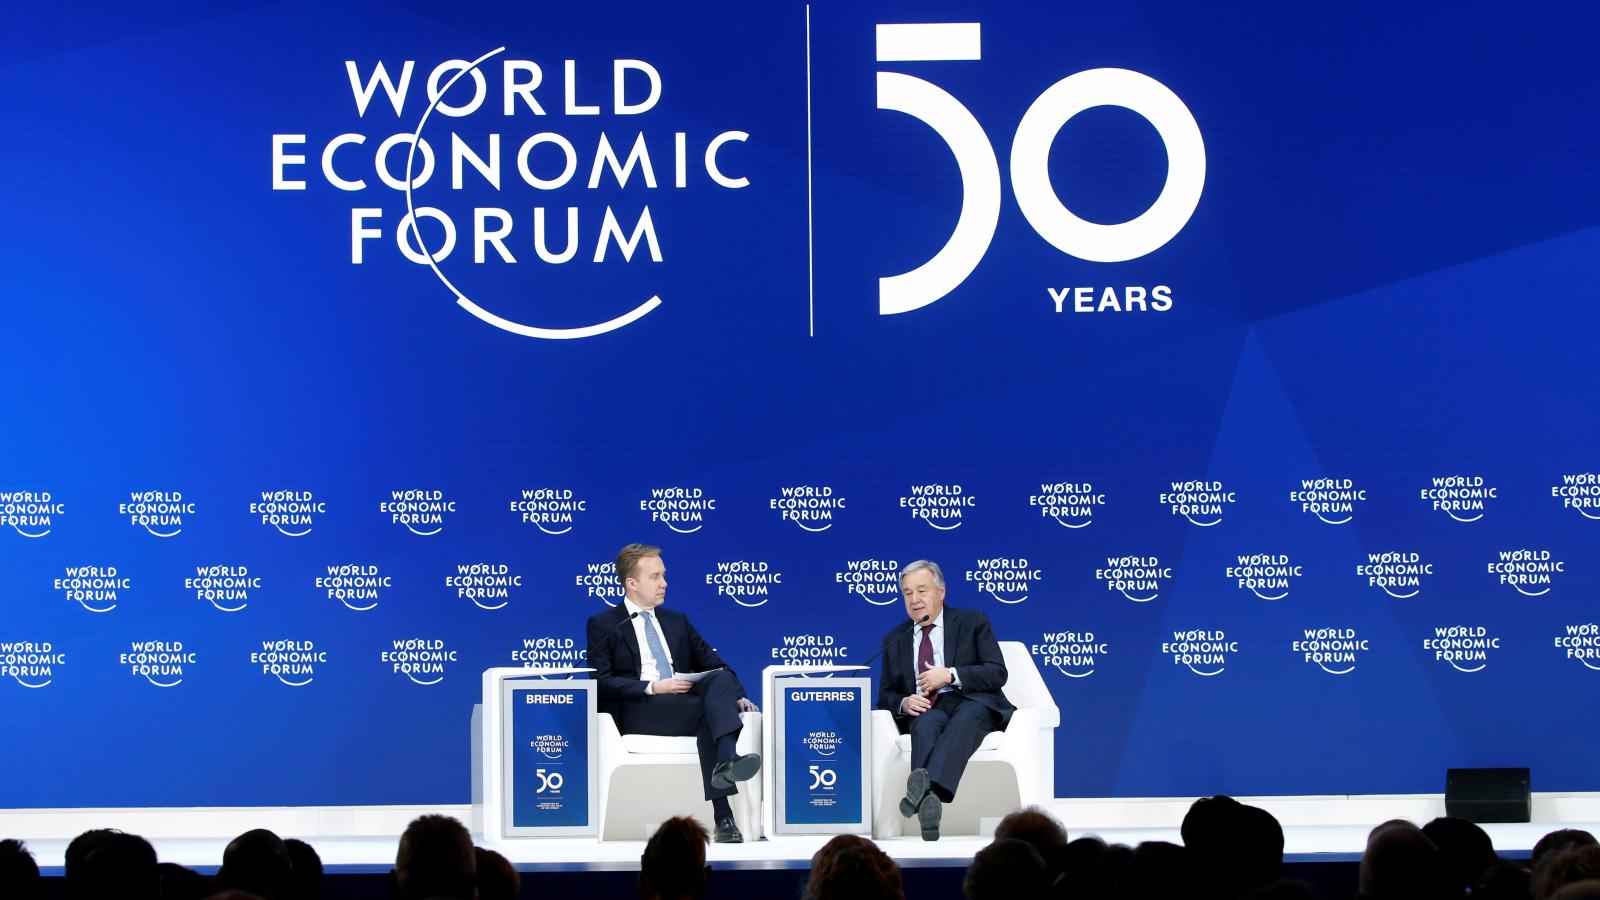 Sustainability central theme at the 50th World Economic Forum in Davos